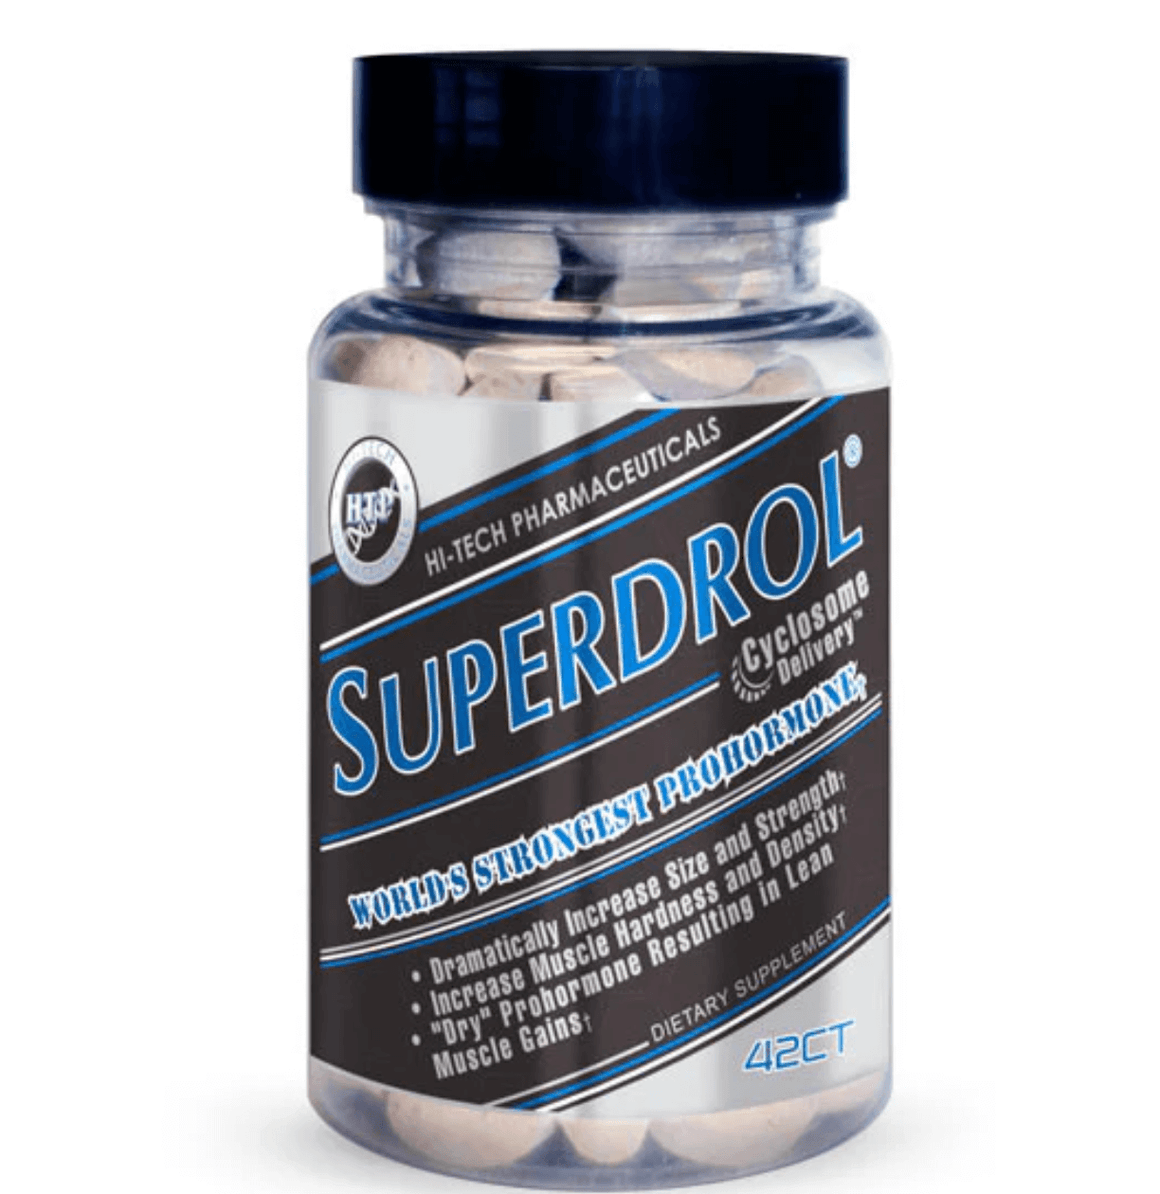 Hi-Tech Superdrol Bodybuilding's Most Anabolically-Potent, Single-Dose Tablet! Formulated with Anabolic & Androgenic Agents, Including Legal Pro Hormone Esters Amino Acid Catalytic Converter and Promotes Protein Synthesis Natural Steroidal Anabolic and An